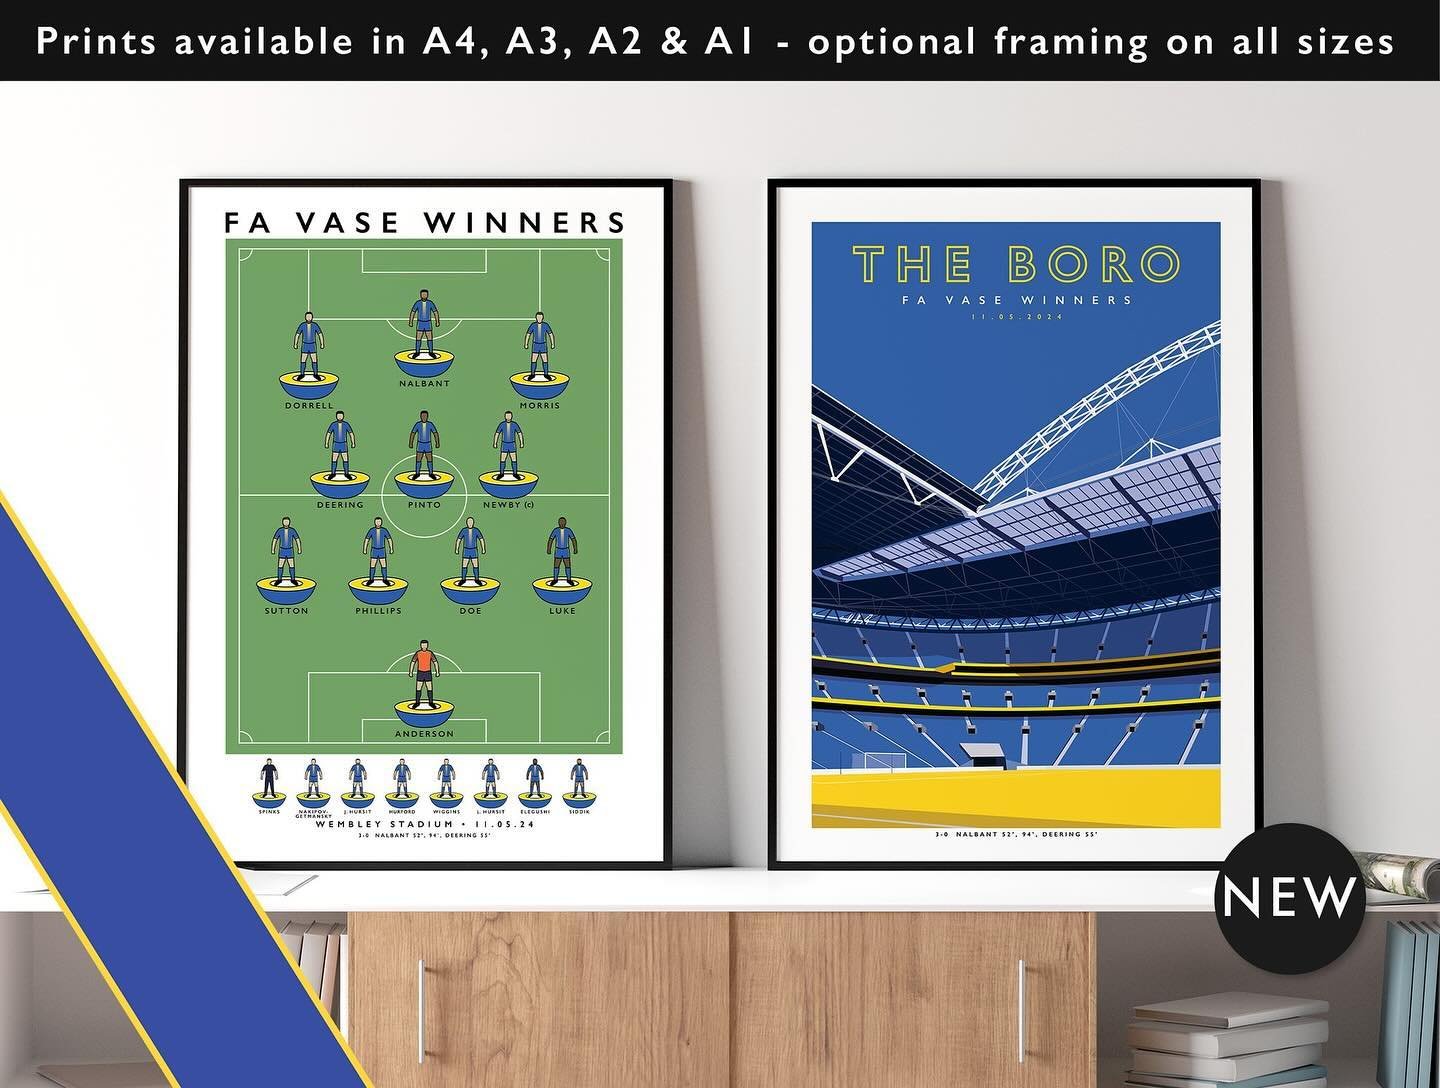 NEW: Romford FC FA Vase Winners &amp; The Boro Wembley

Get 10% off until midnight with the discount code
THE-BORO

Shop now: matthewjiwood.com/subbuteo-teams&hellip;

Prints available in A4, A3, A2 &amp; A1 with optional framing

#RomfordFC #Romford